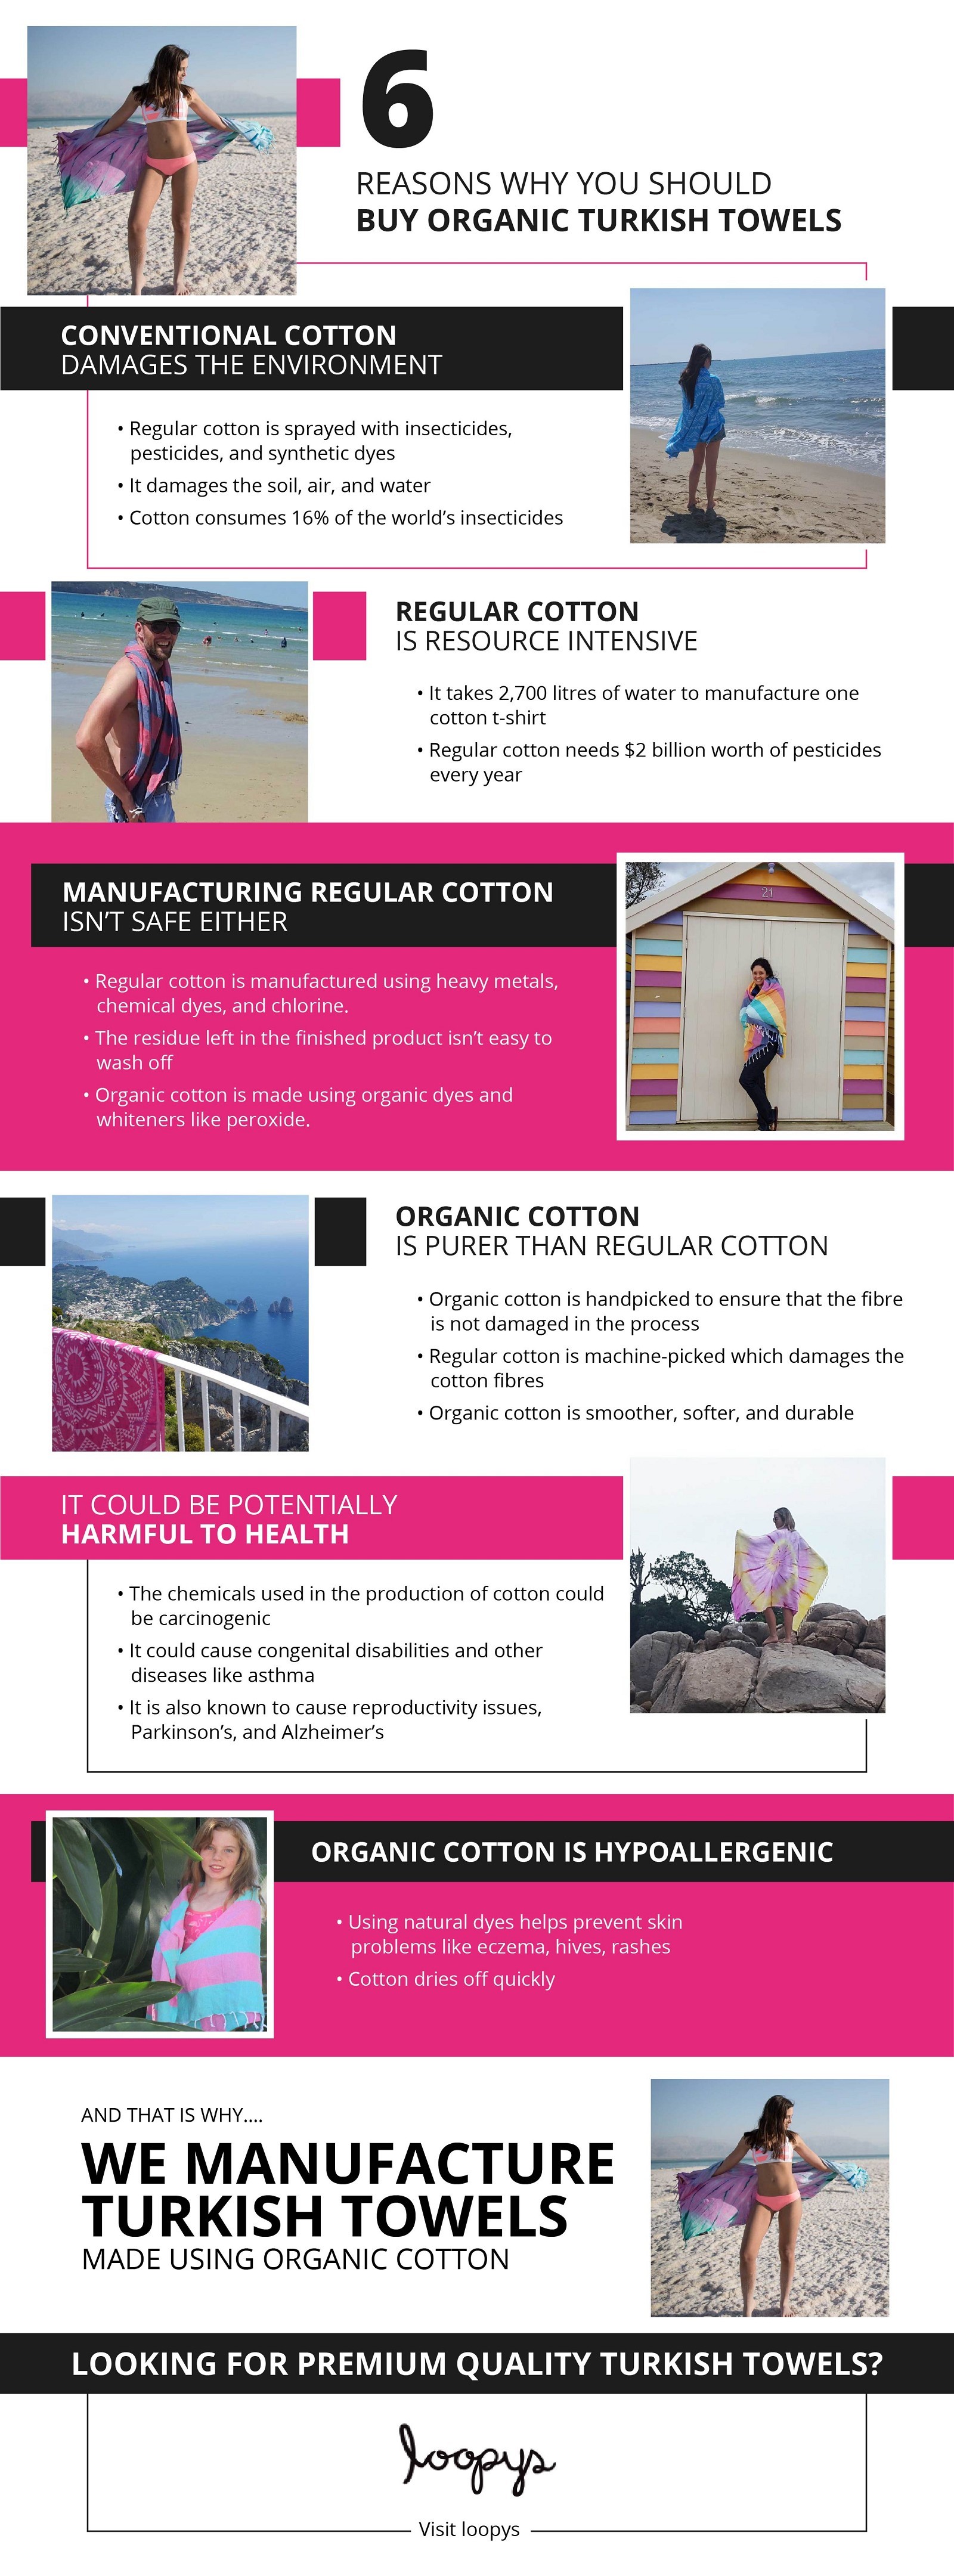 6 Reasons Why Organic Cotton Is Much Better Than Regular Cotton